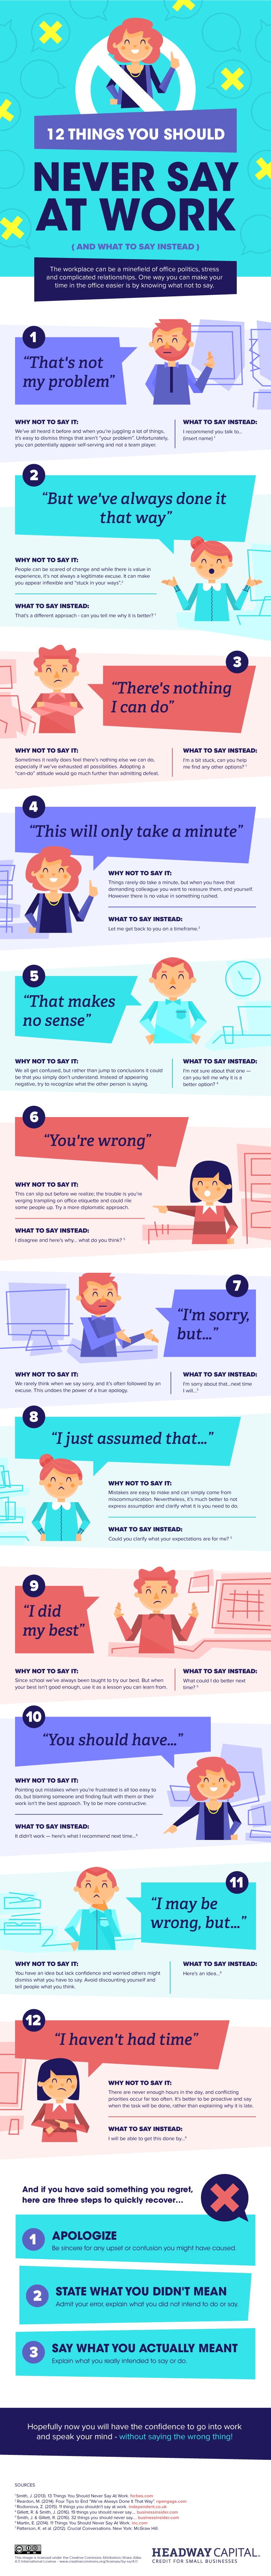 12 Things You Should Never Say At Work (and what to say instead) - #infographic